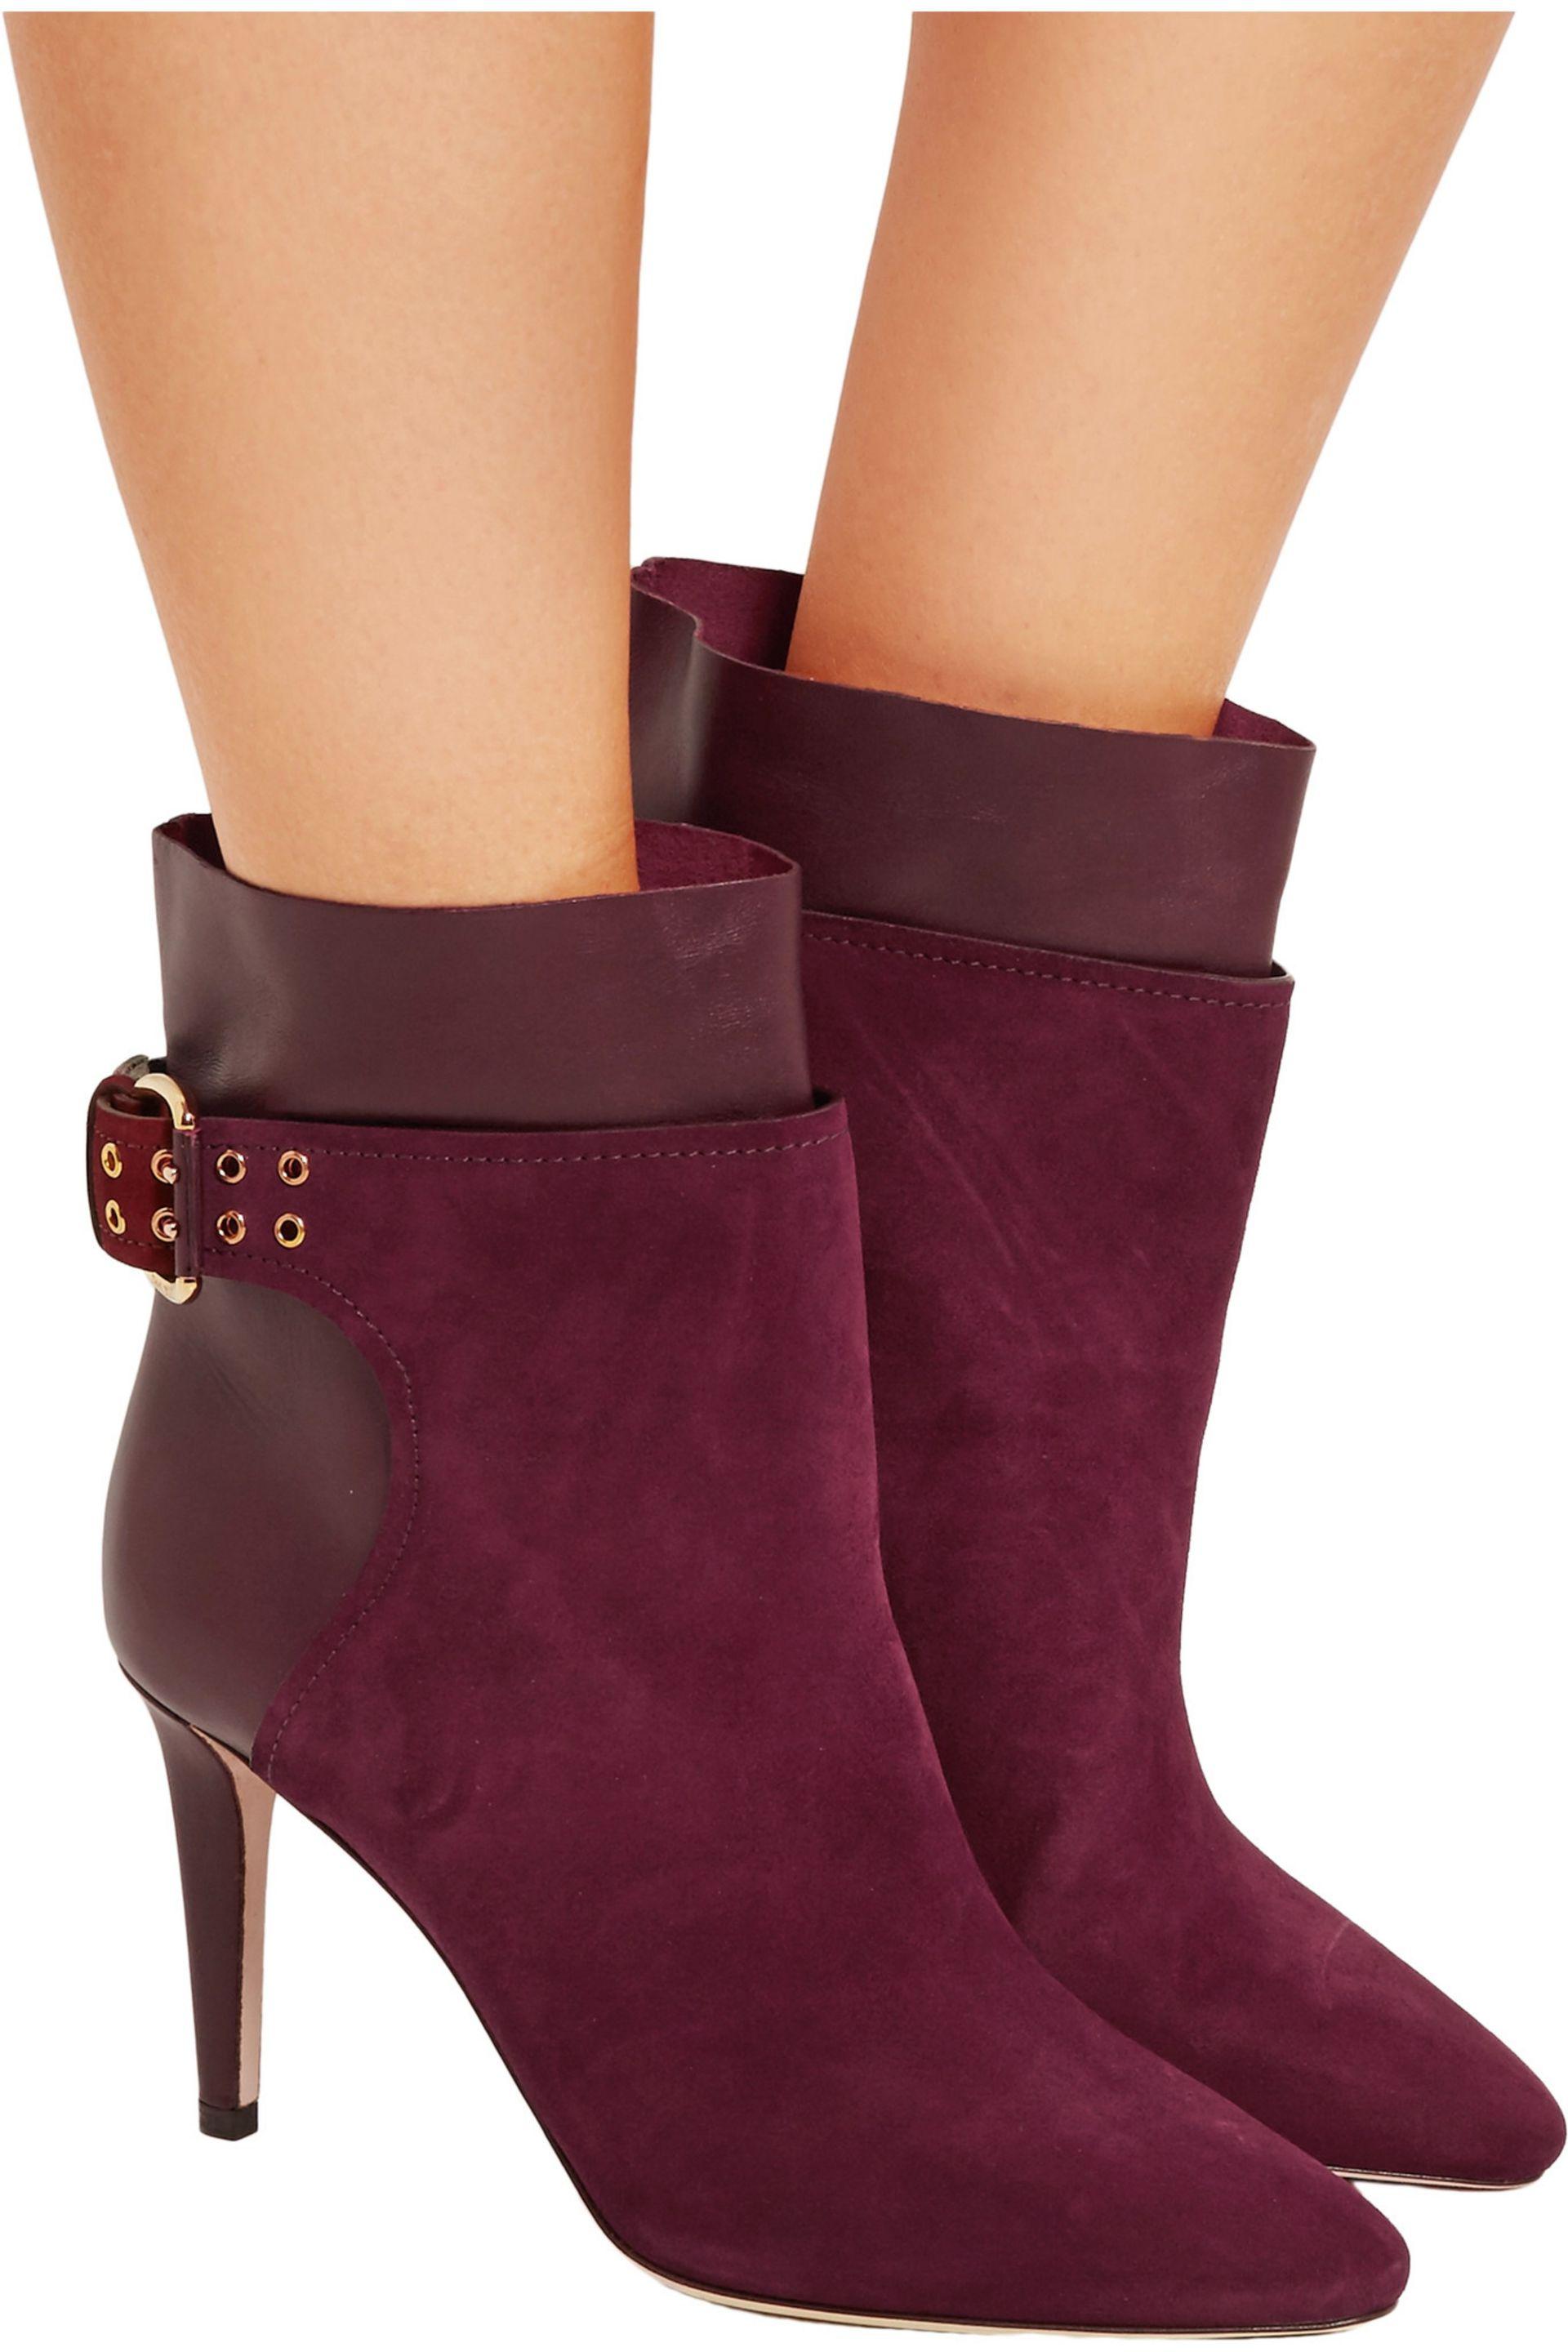 Jimmy Choo Major Suede And Leather Ankle Boots In Burgundy Purple Lyst 8249